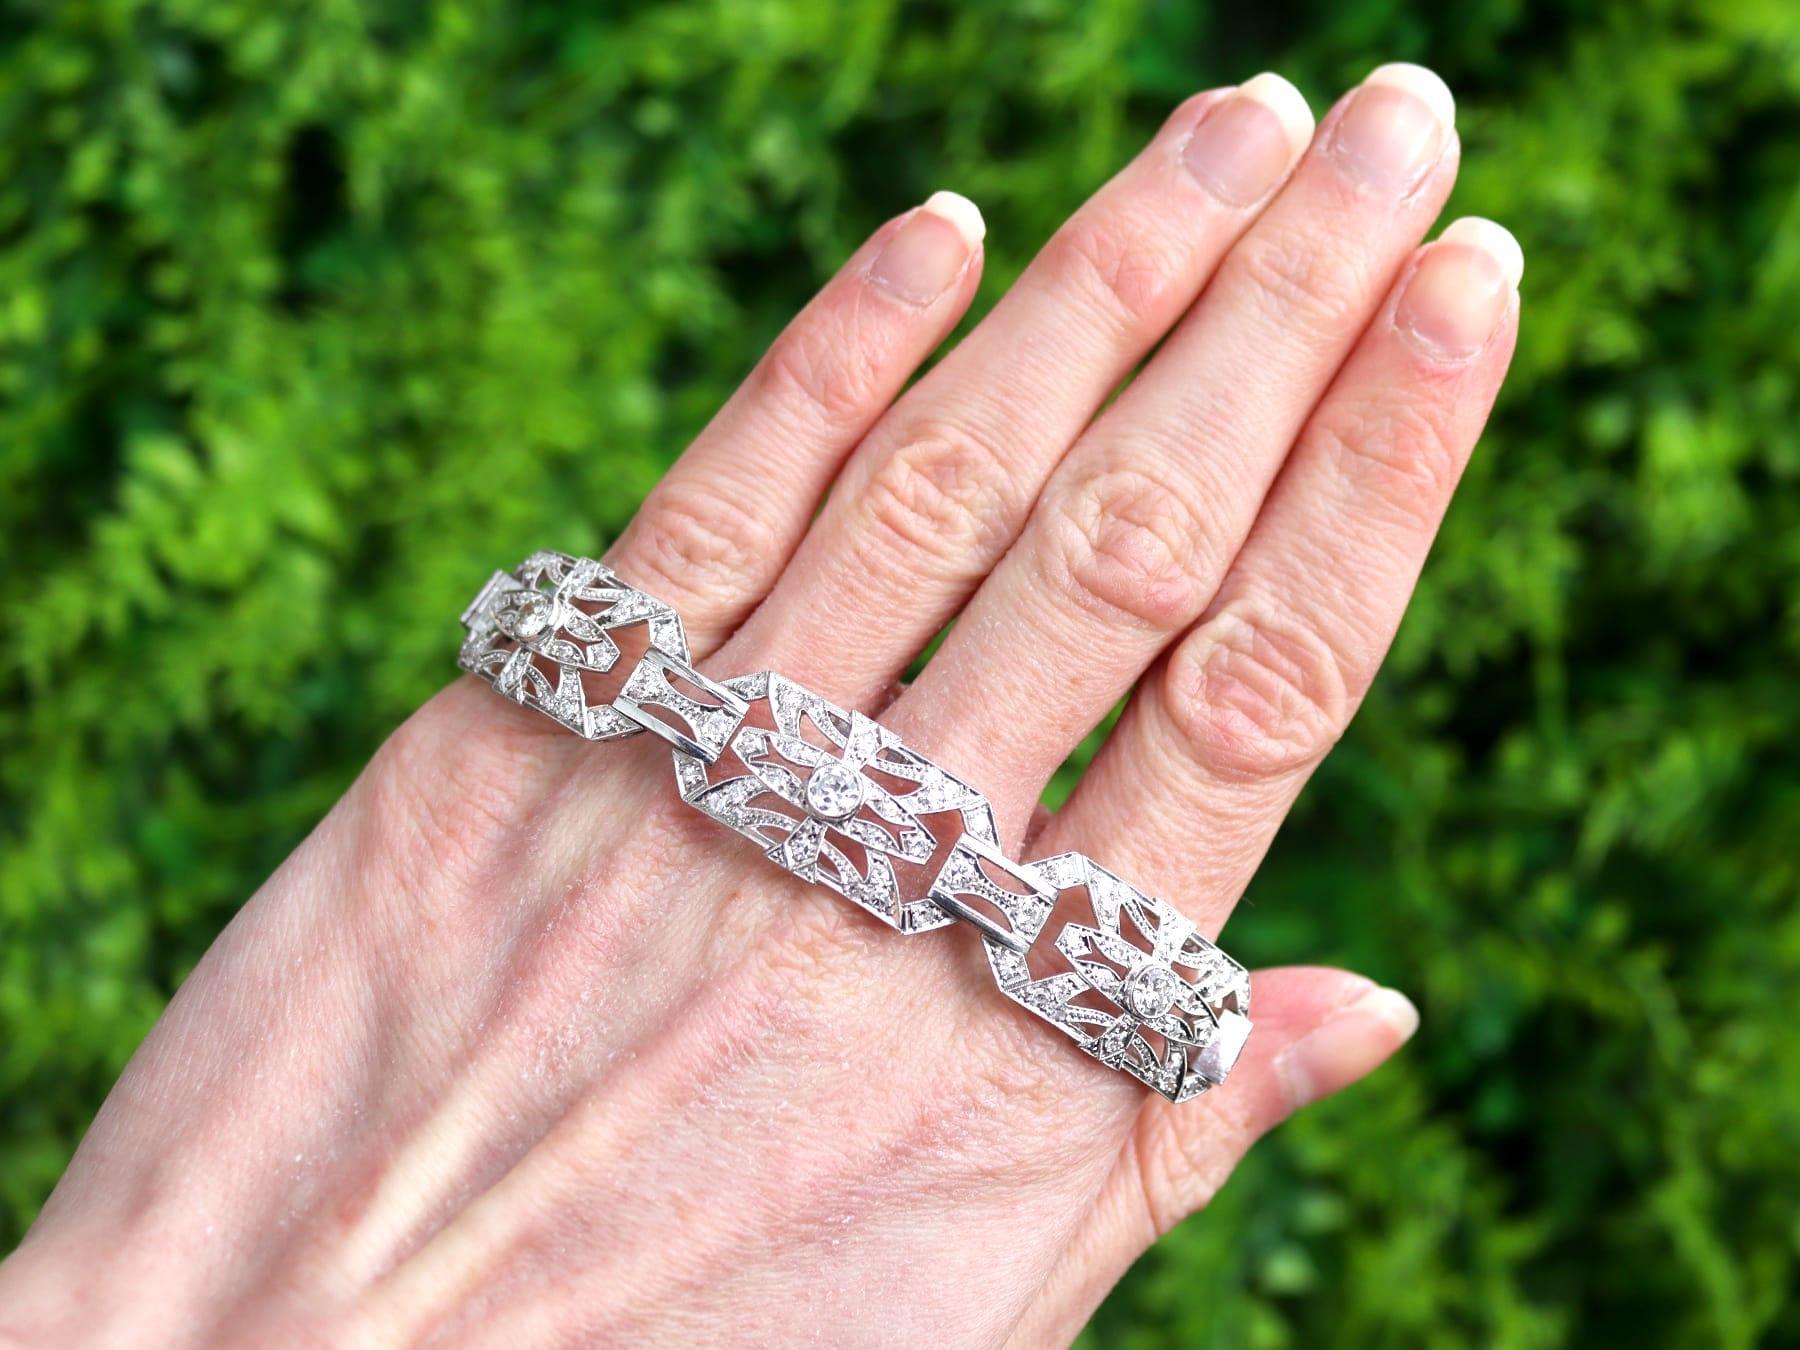 A stunning, fine and impressive antique 1930's 3.86 carat diamond and platinum Art Deco bracelet; part of our diverse antique jewellery and estate jewelry collections

This stunning, fine and impressive antique diamond bracelet has been crafted in